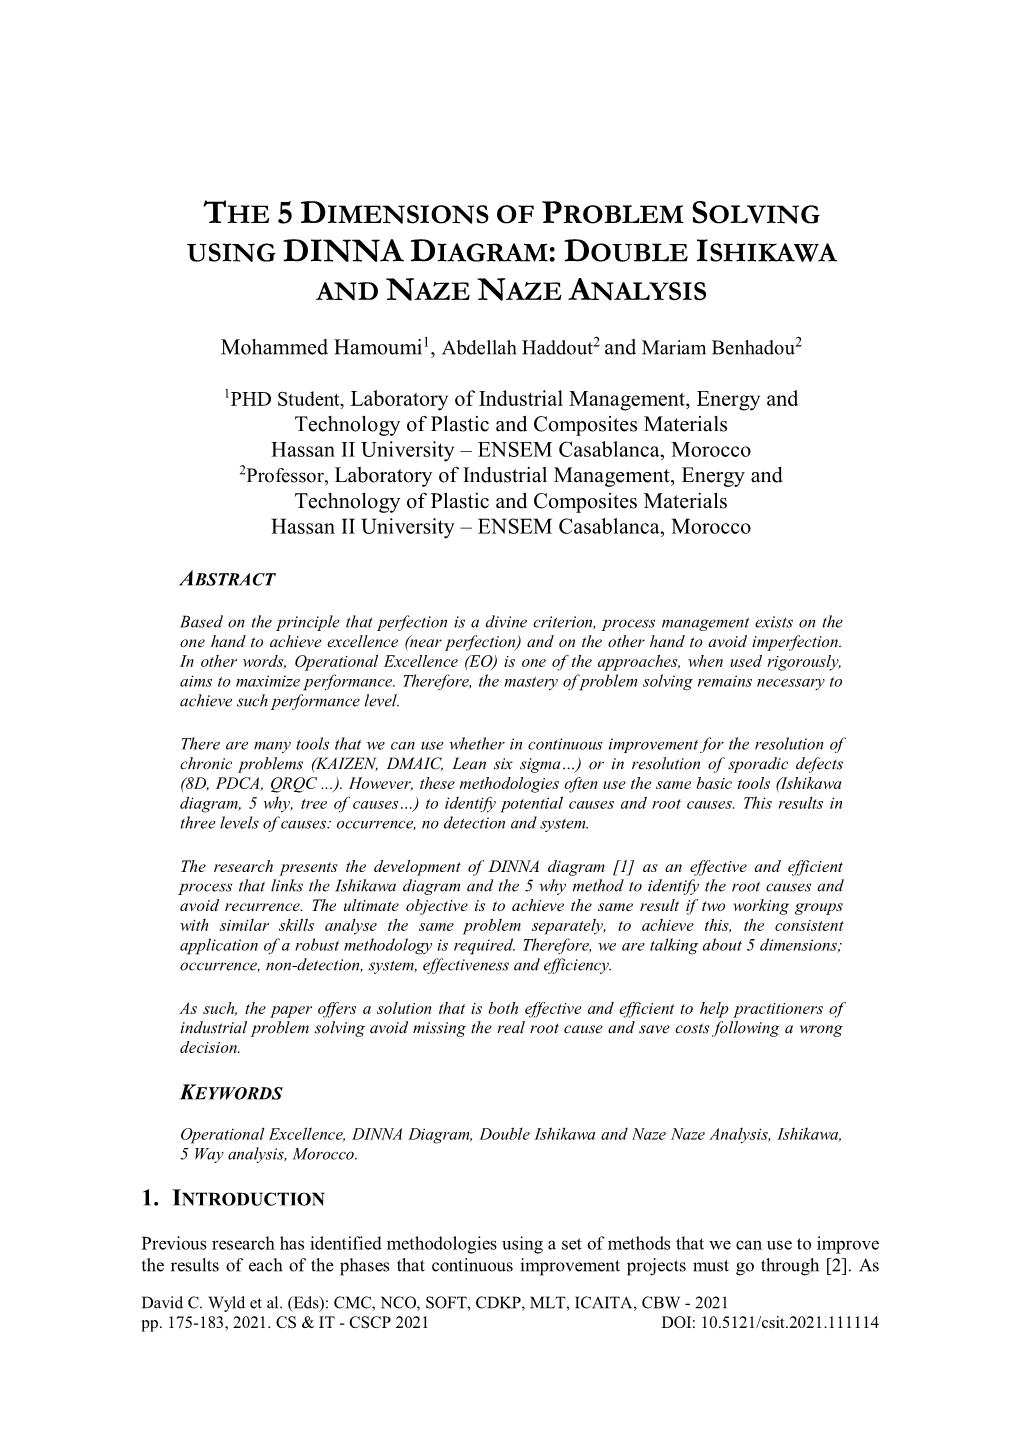 The 5 Dimensions of Problem Solving Using Dinna Diagram: Double Ishikawa and Naze Naze Analysis